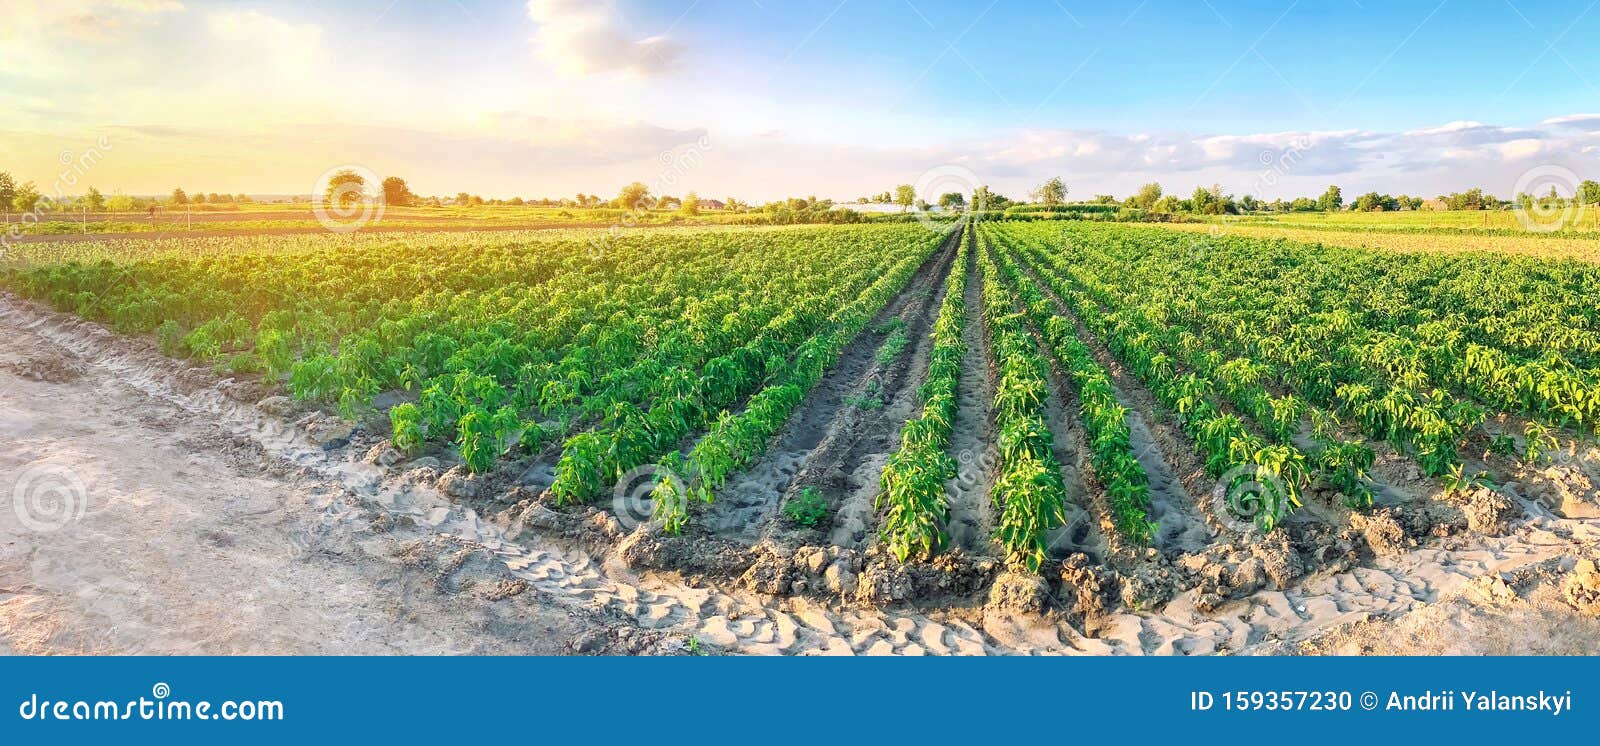 panoramic photo of a beautiful agricultural view with pepper plantations. agriculture and farming. agribusiness. agro industry.